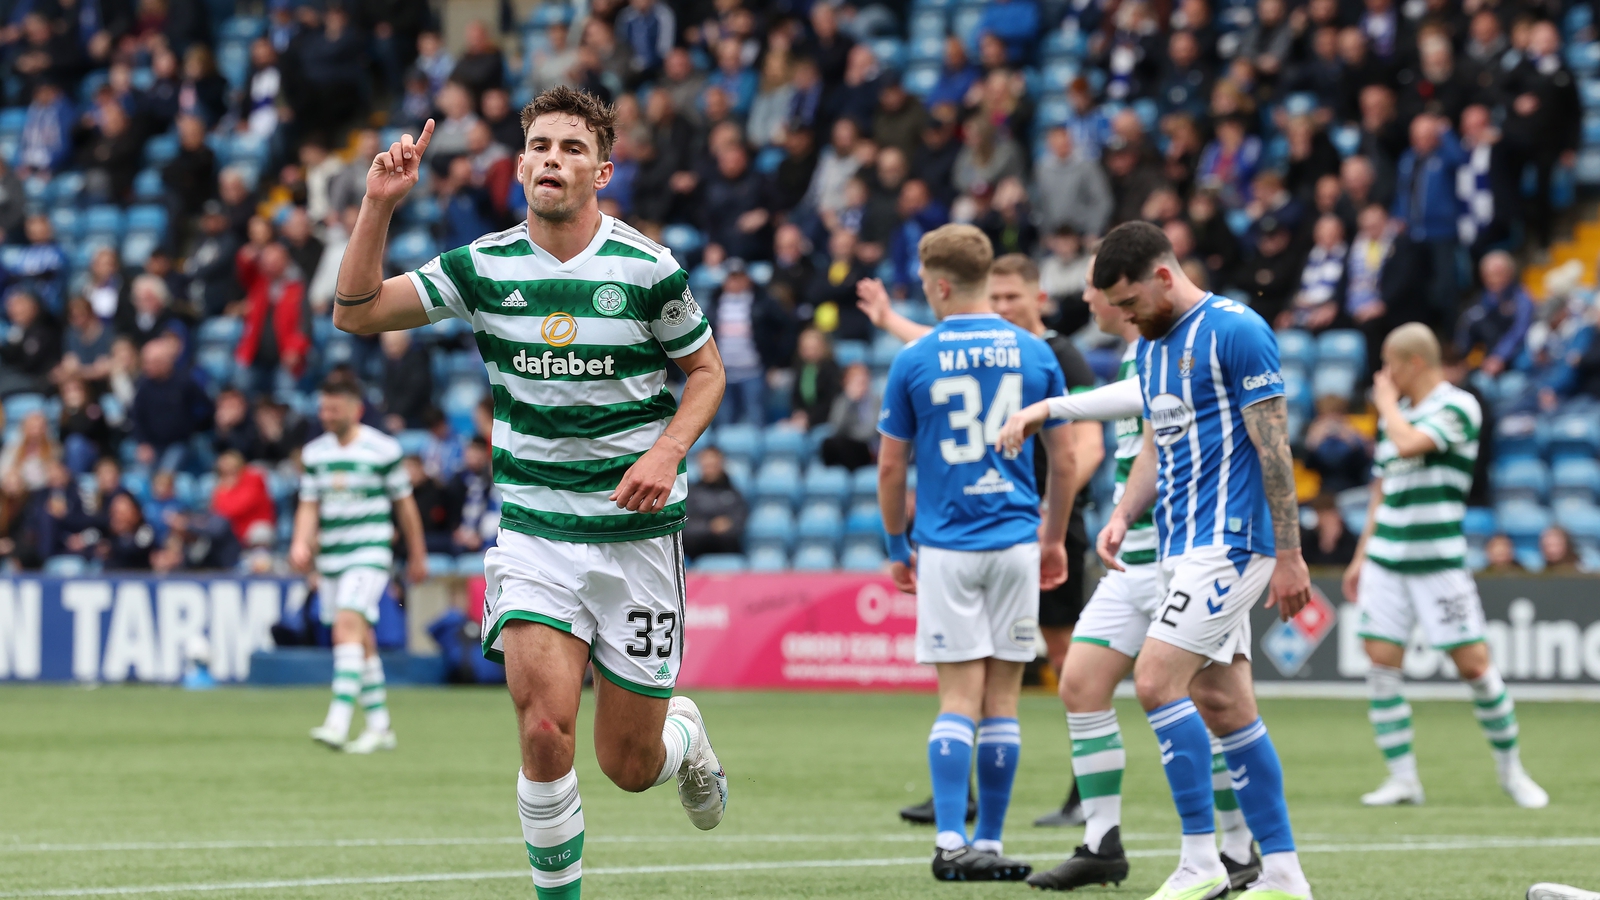 Early goals pave the way for Celtic to down Kilmarnock